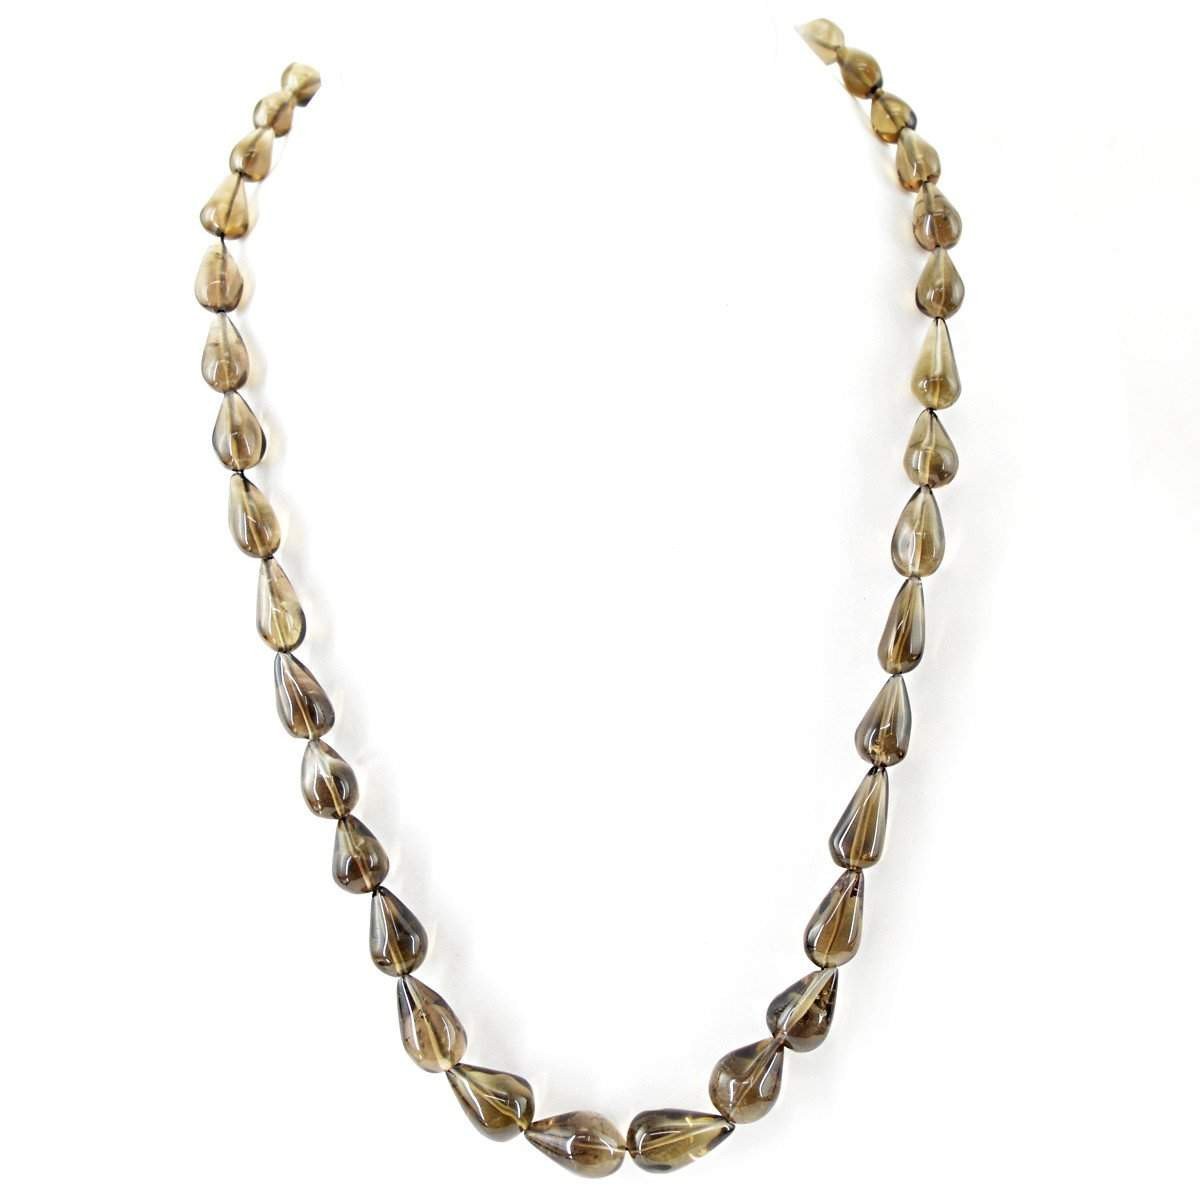 gemsmore:Exclusive Natural Smoky Quartz Necklace Single Strand Pear Shape Untreated Beads